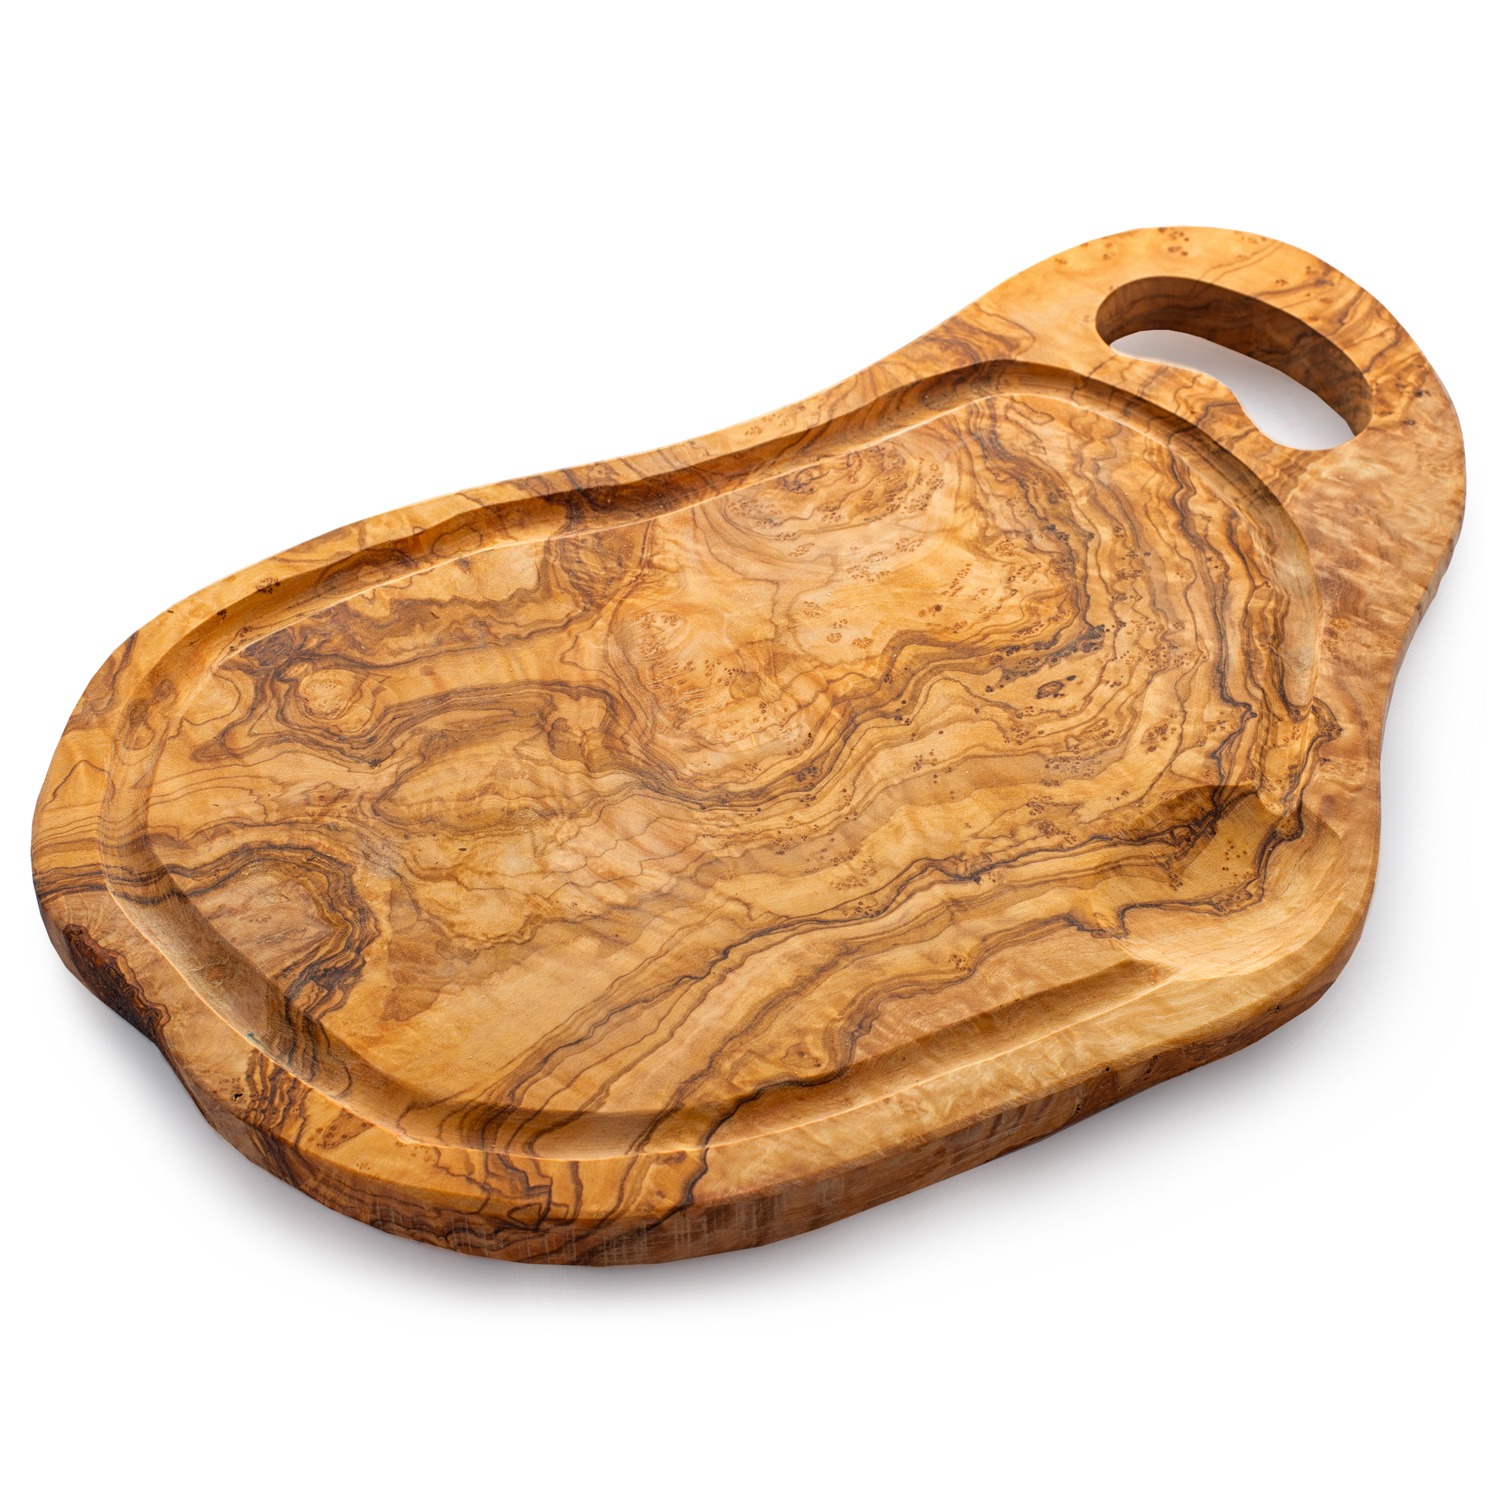 Olive Wood Steak Meat Board with Juice Groove (20″) - Forest Decor